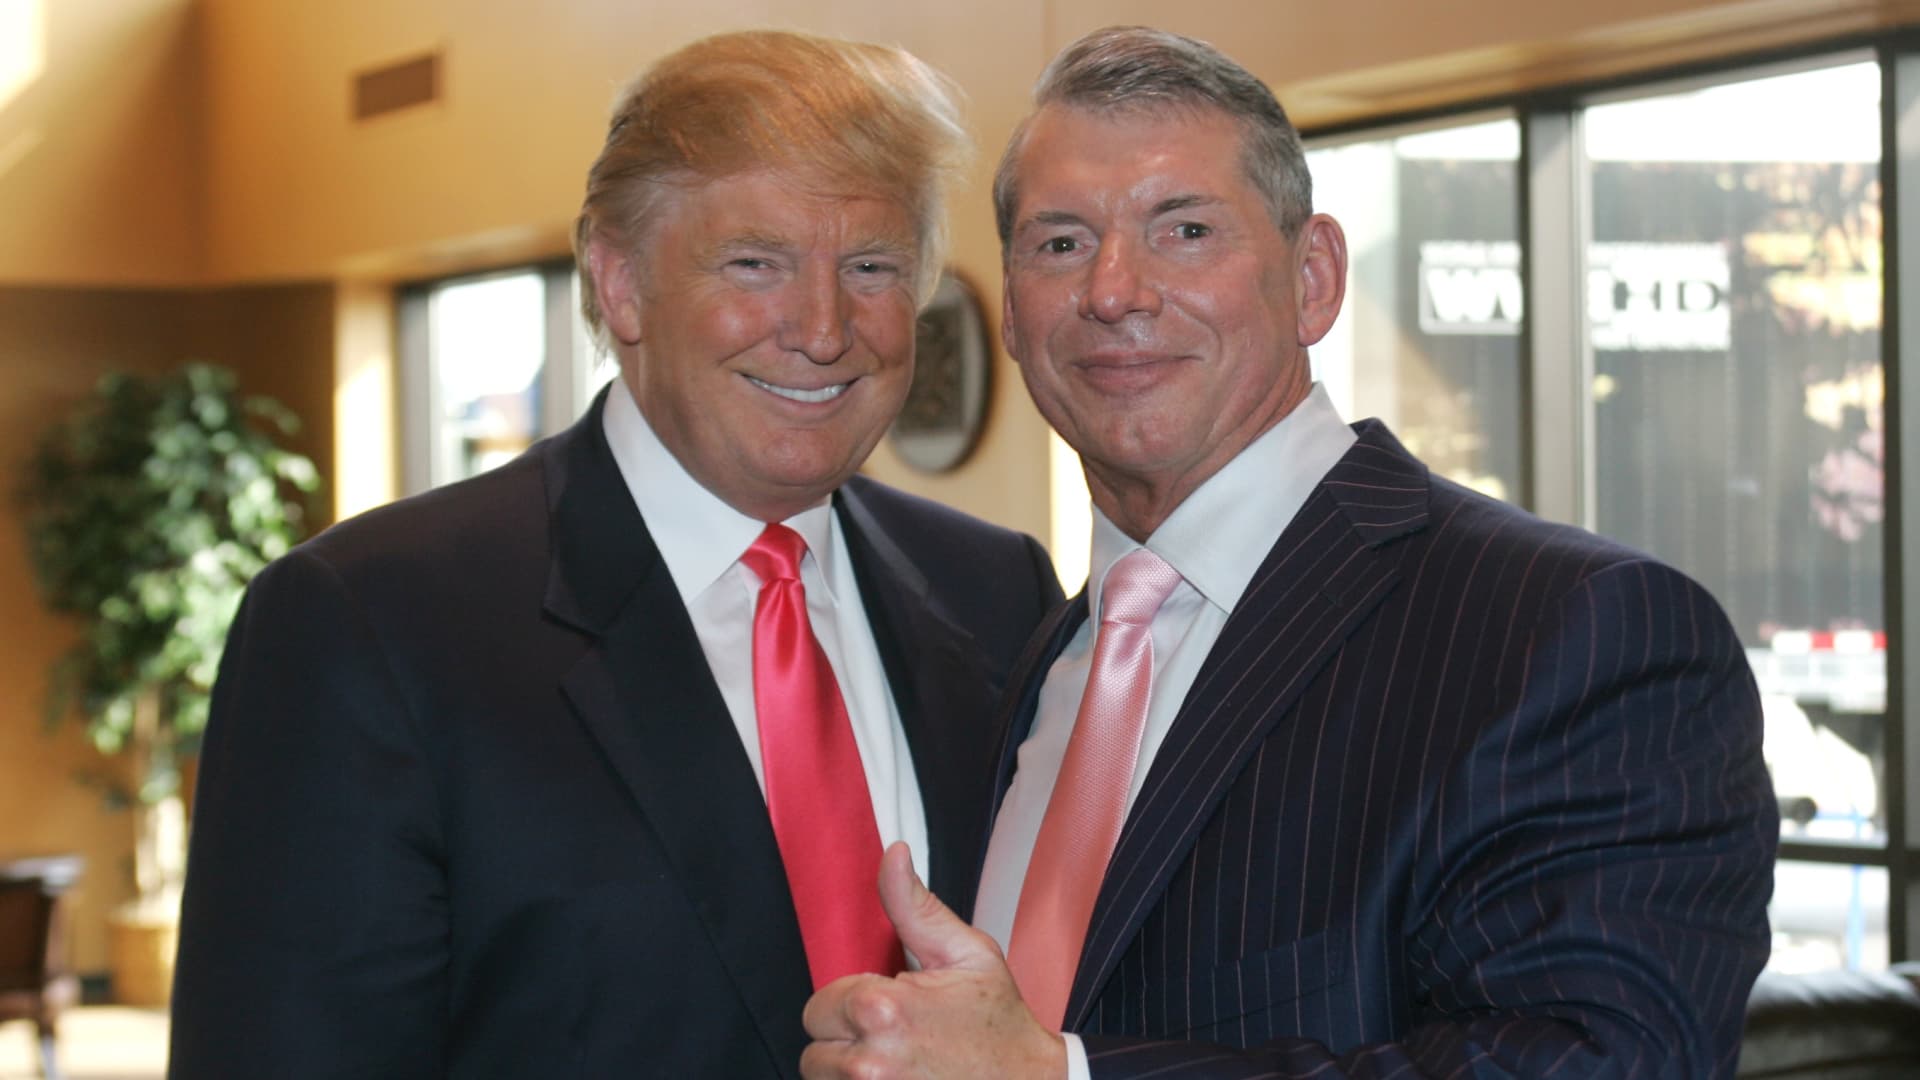 Vince McMahon is taking vacations and in contact with Trump as WWE tries to accelerate on from scandal-plagued ex-CEO